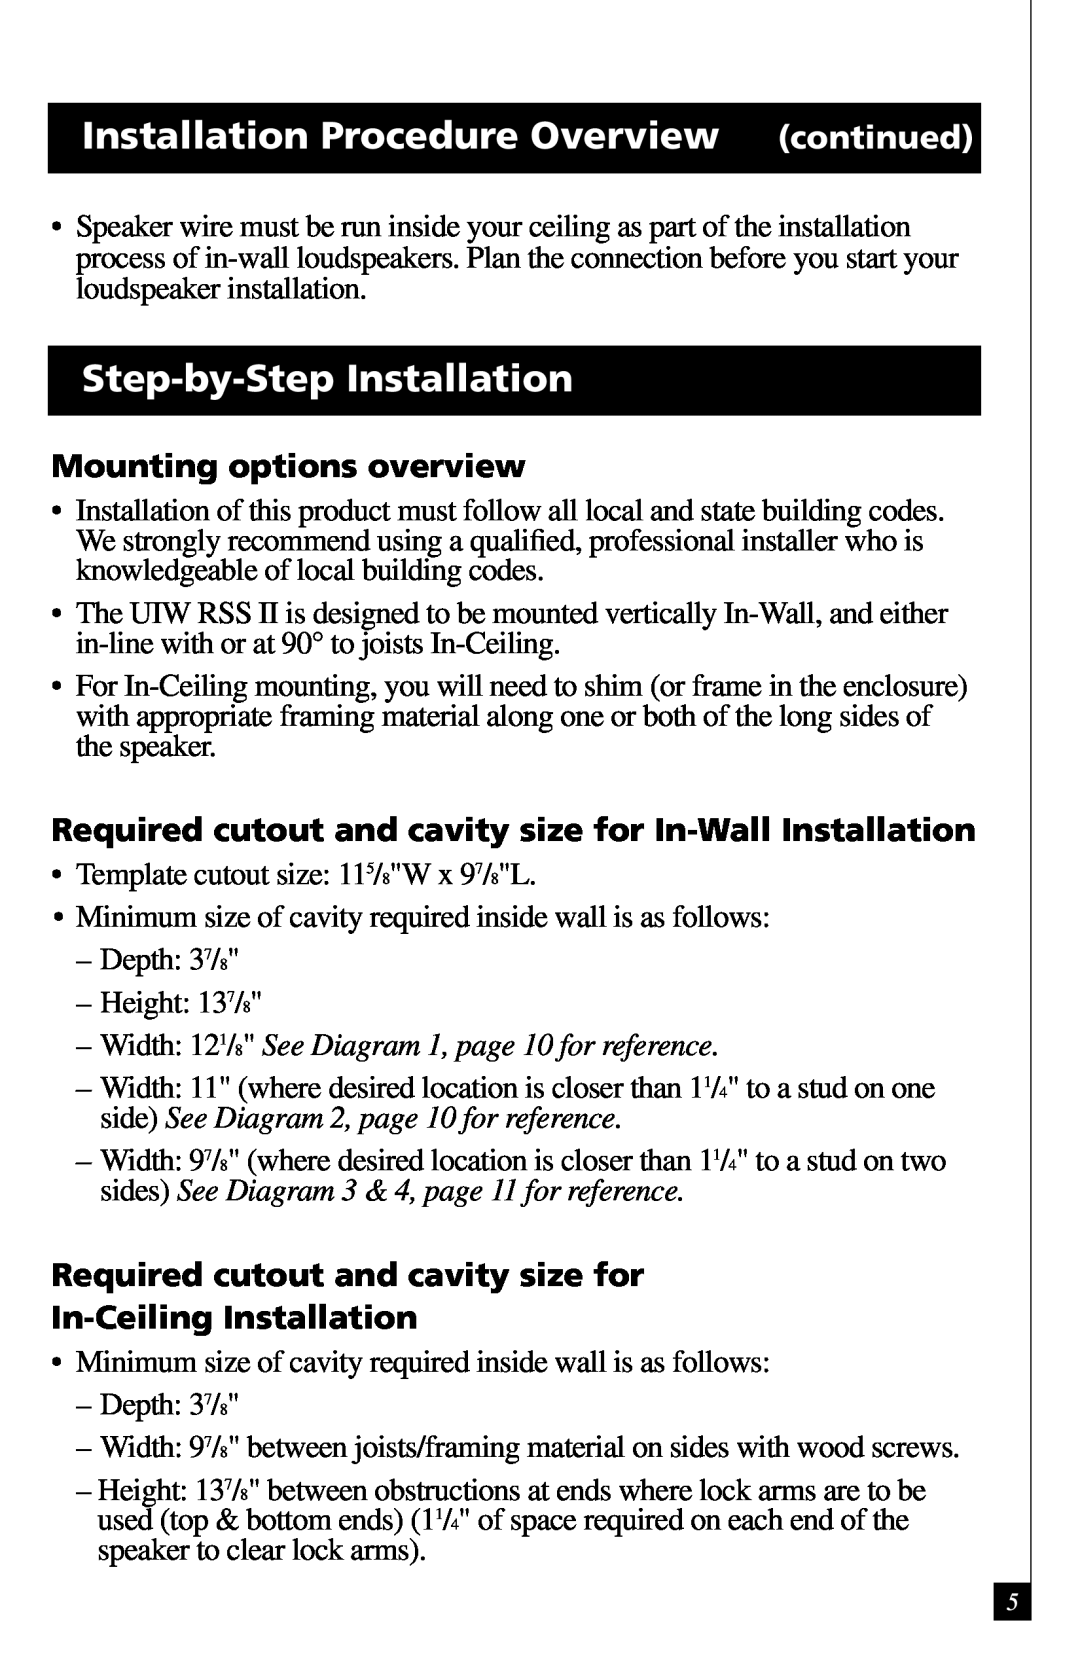 Definitive Technology RSS II Installation Procedure Overview continued, Step-by-StepInstallation, In-CeilingInstallation 